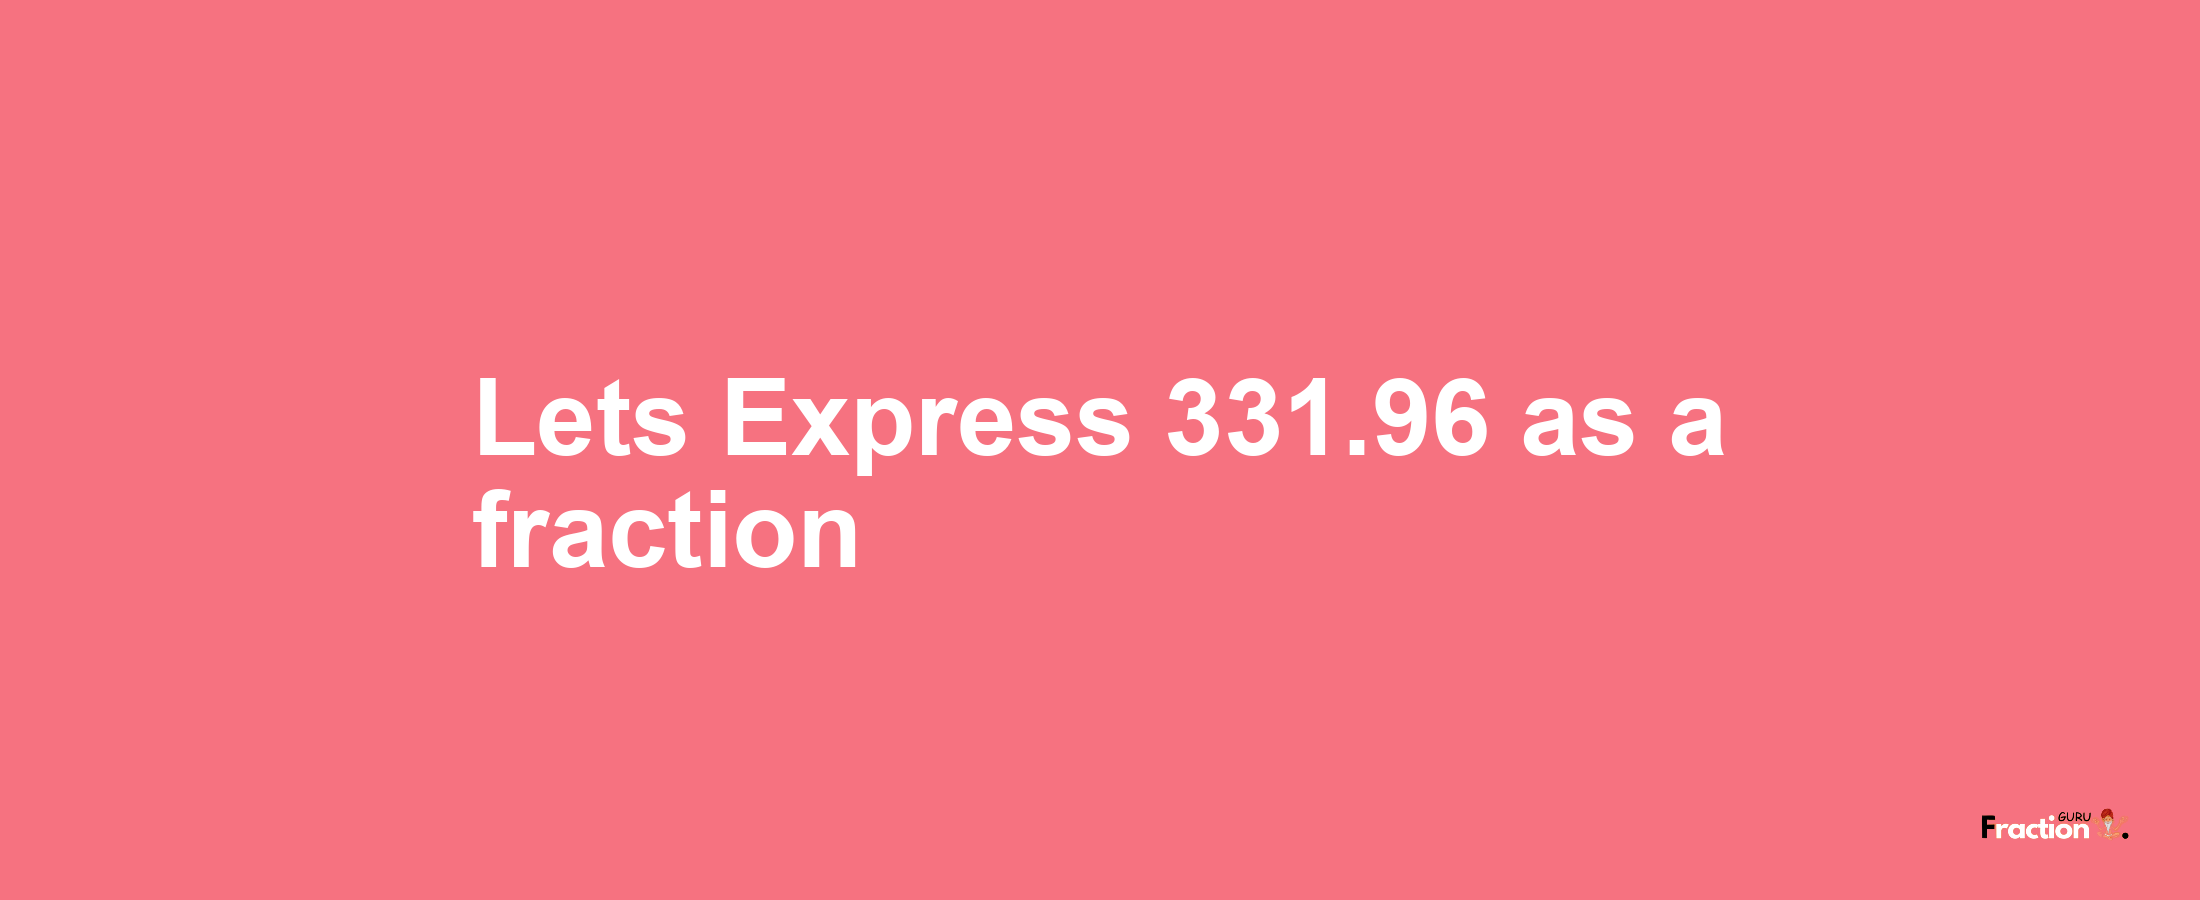 Lets Express 331.96 as afraction